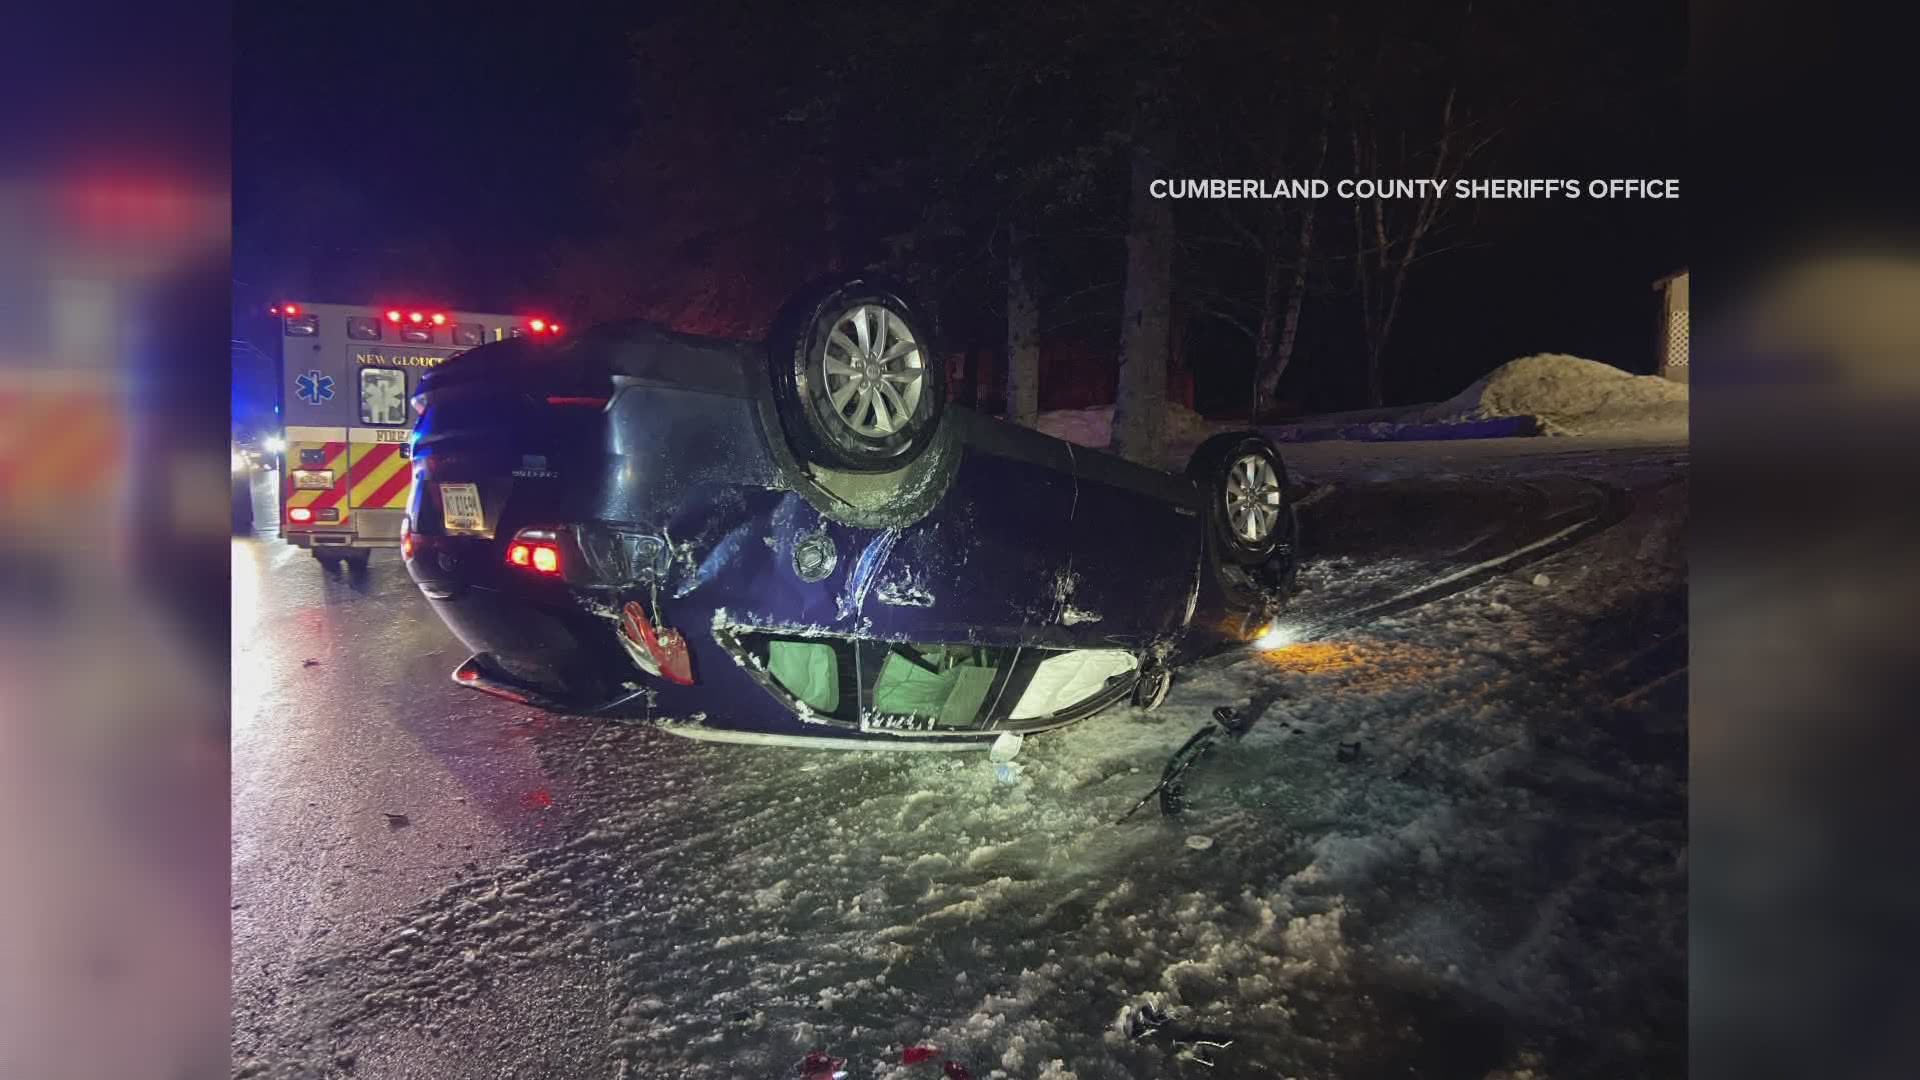 Black ice caused multiple crashes within minutes of each other on Route 100 in New Gloucester new the Auburn line Saturday evening.